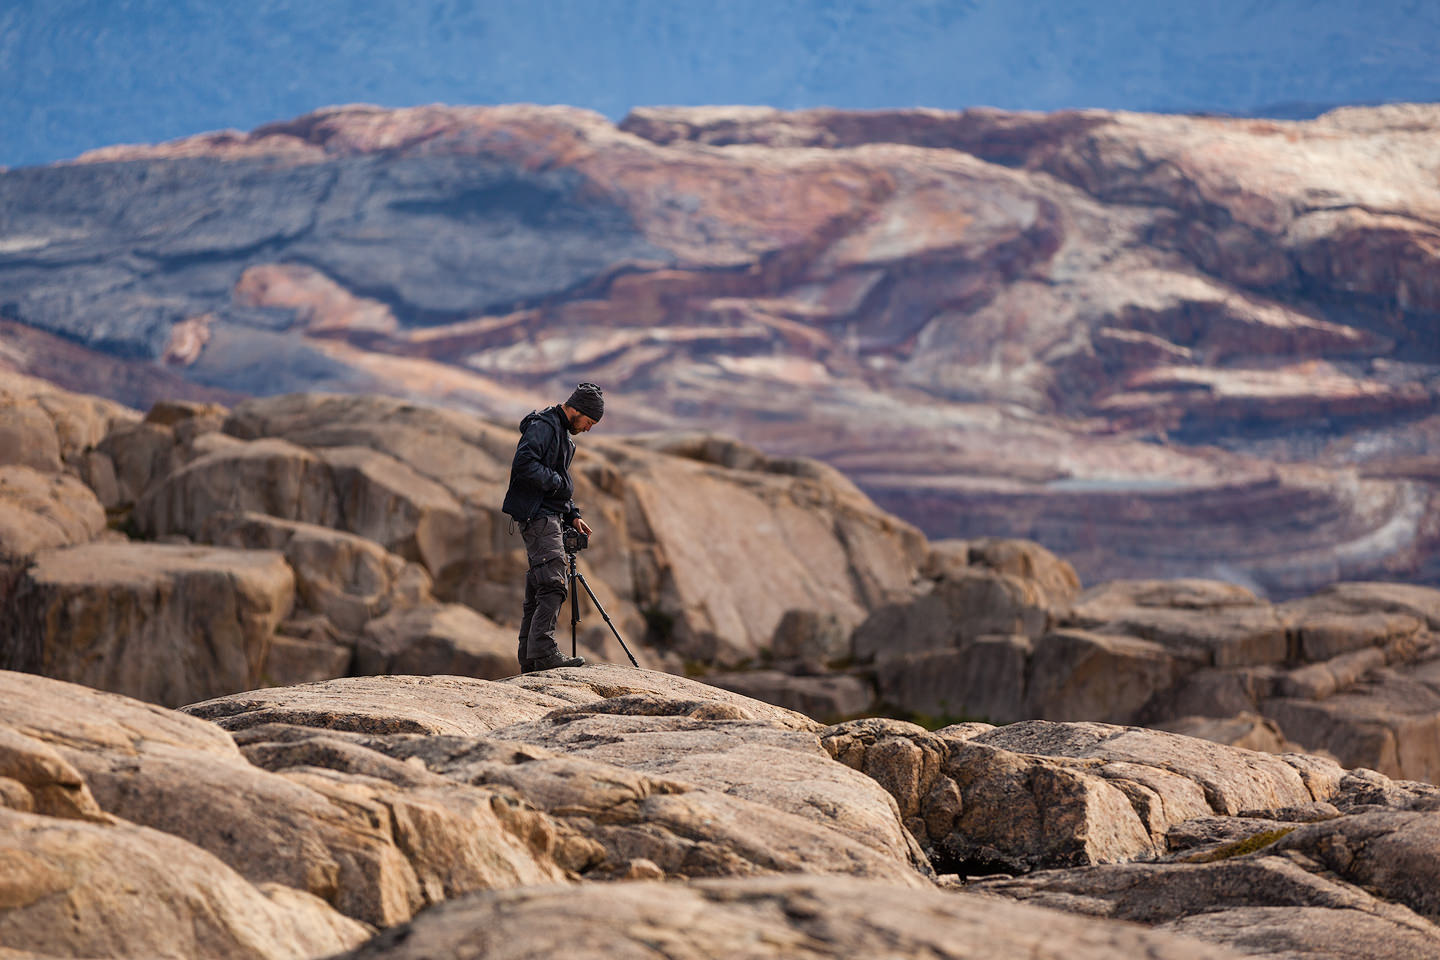 Joerg Bonner standing on a rock holding his camera and tripod.